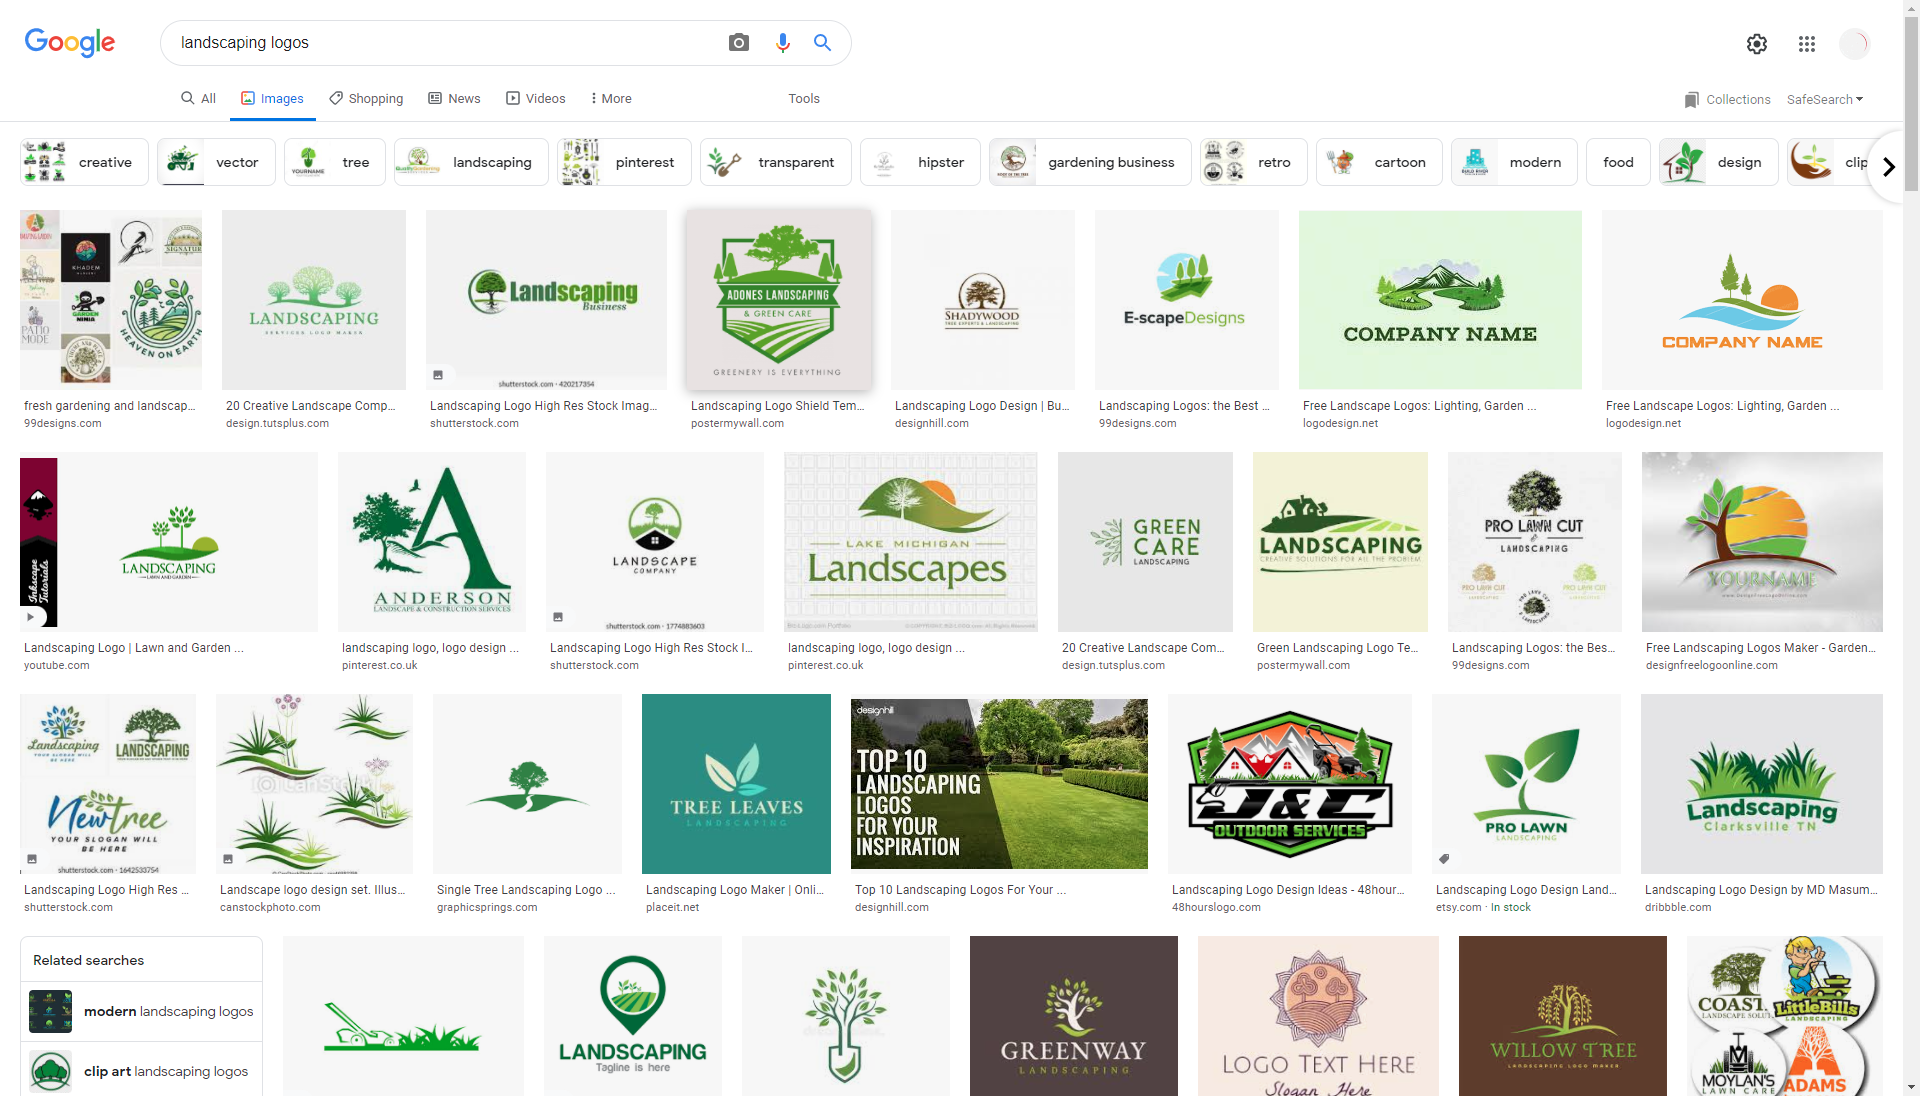 Landscaping logo search results